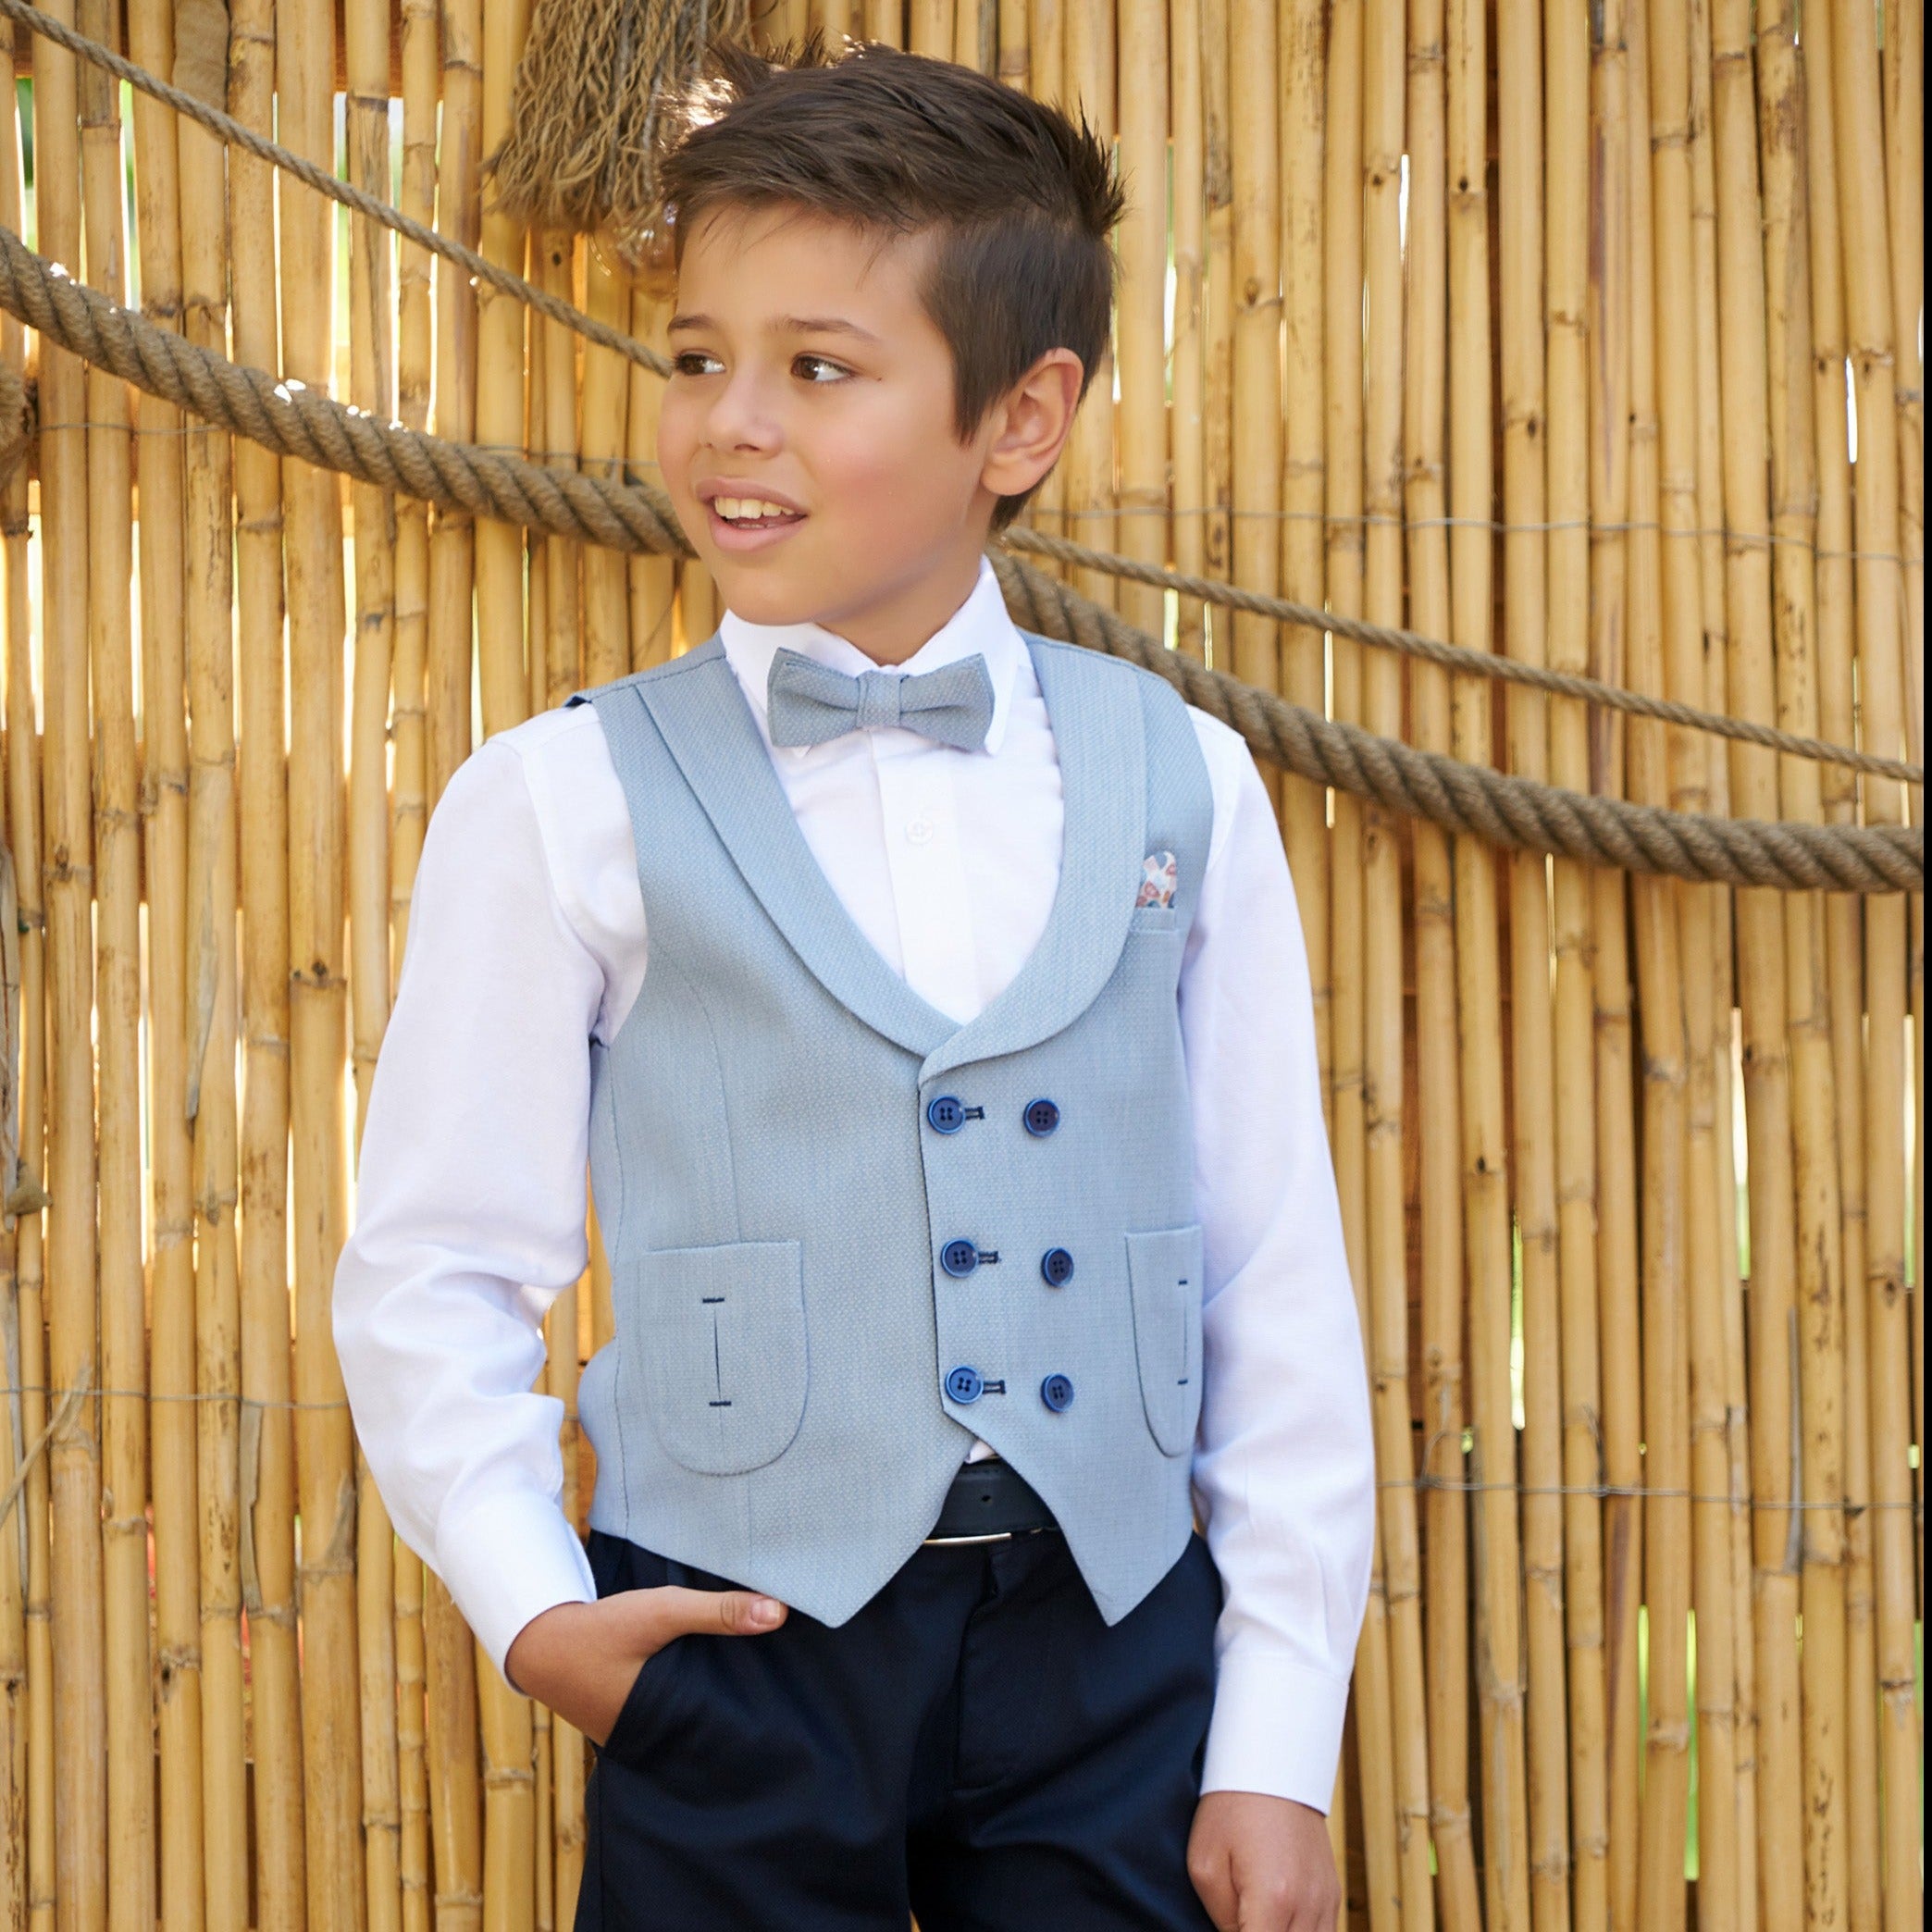 The Player Formal Boys Suit